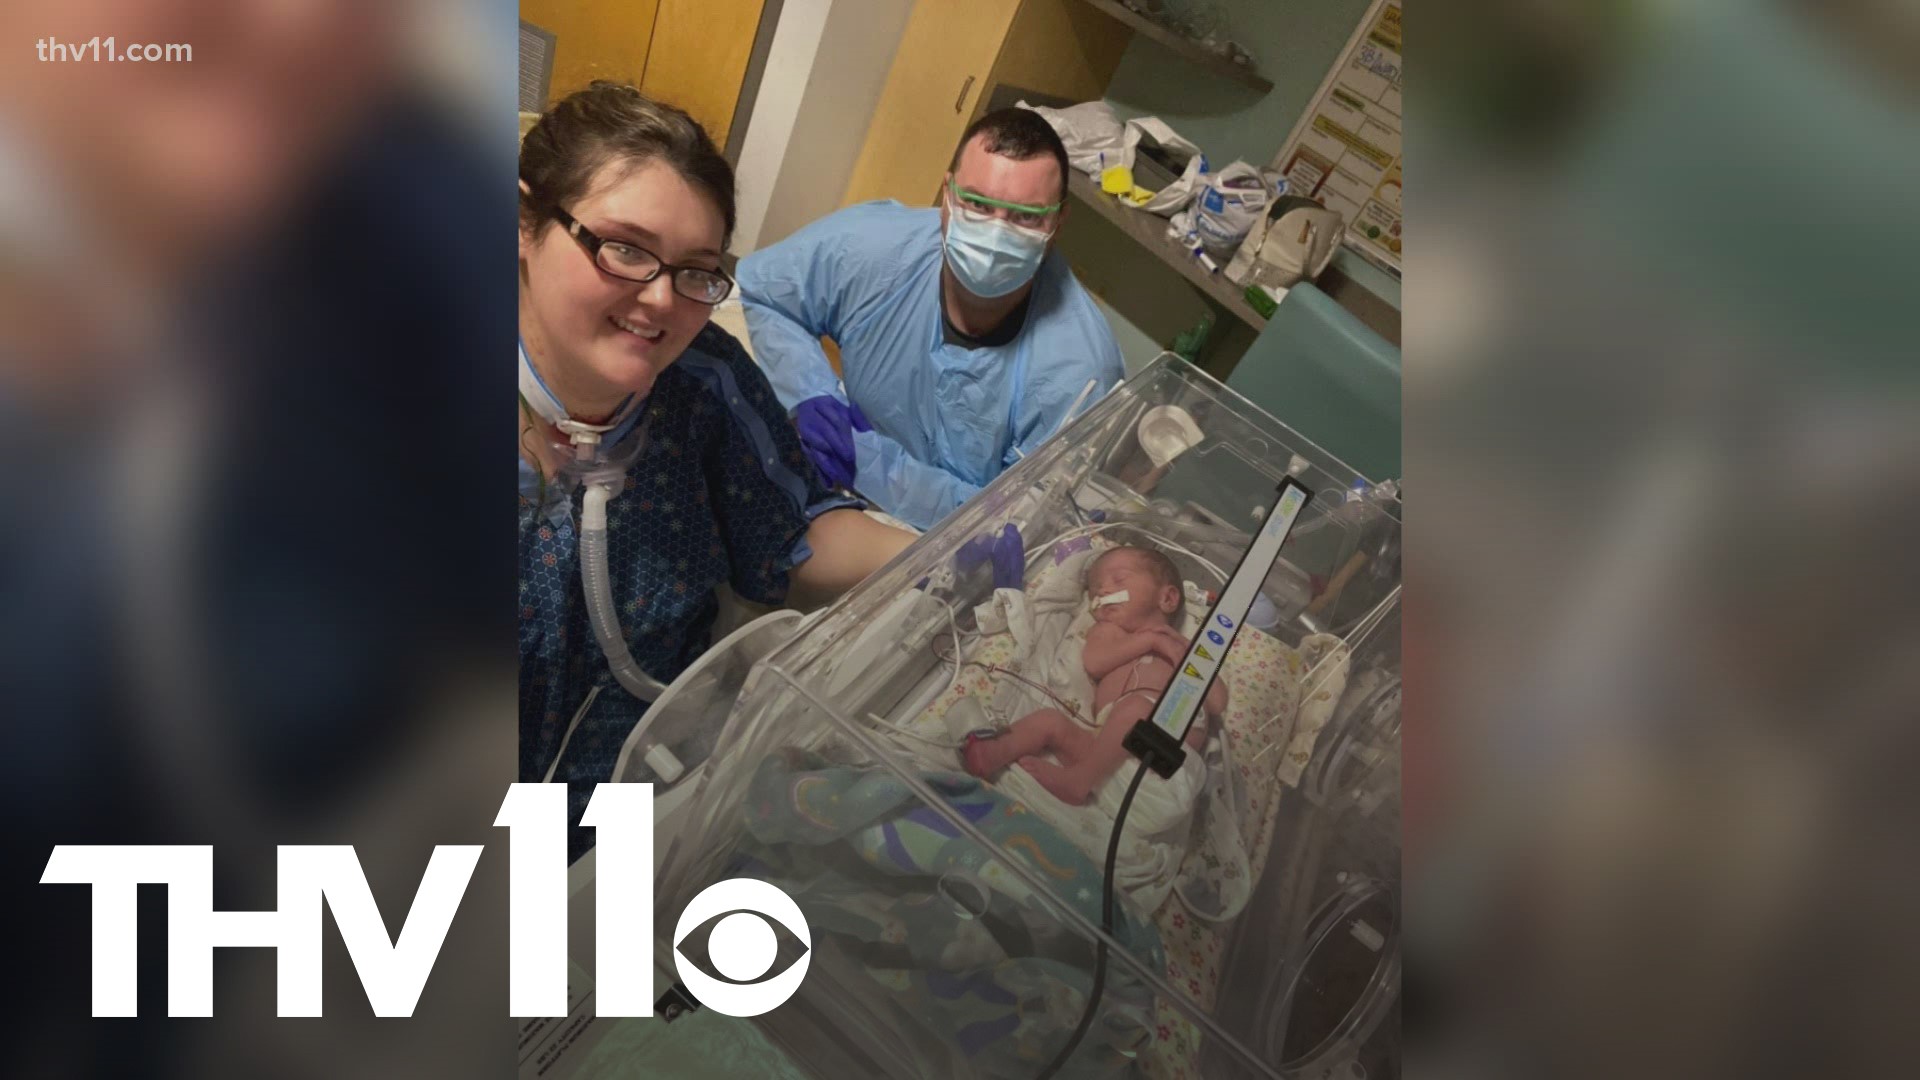 A Star City woman chose not to get vaccinated while pregnant, but she eventually caught COVID-19. Now, she's telling her story in hopes it doesn't happen to others.